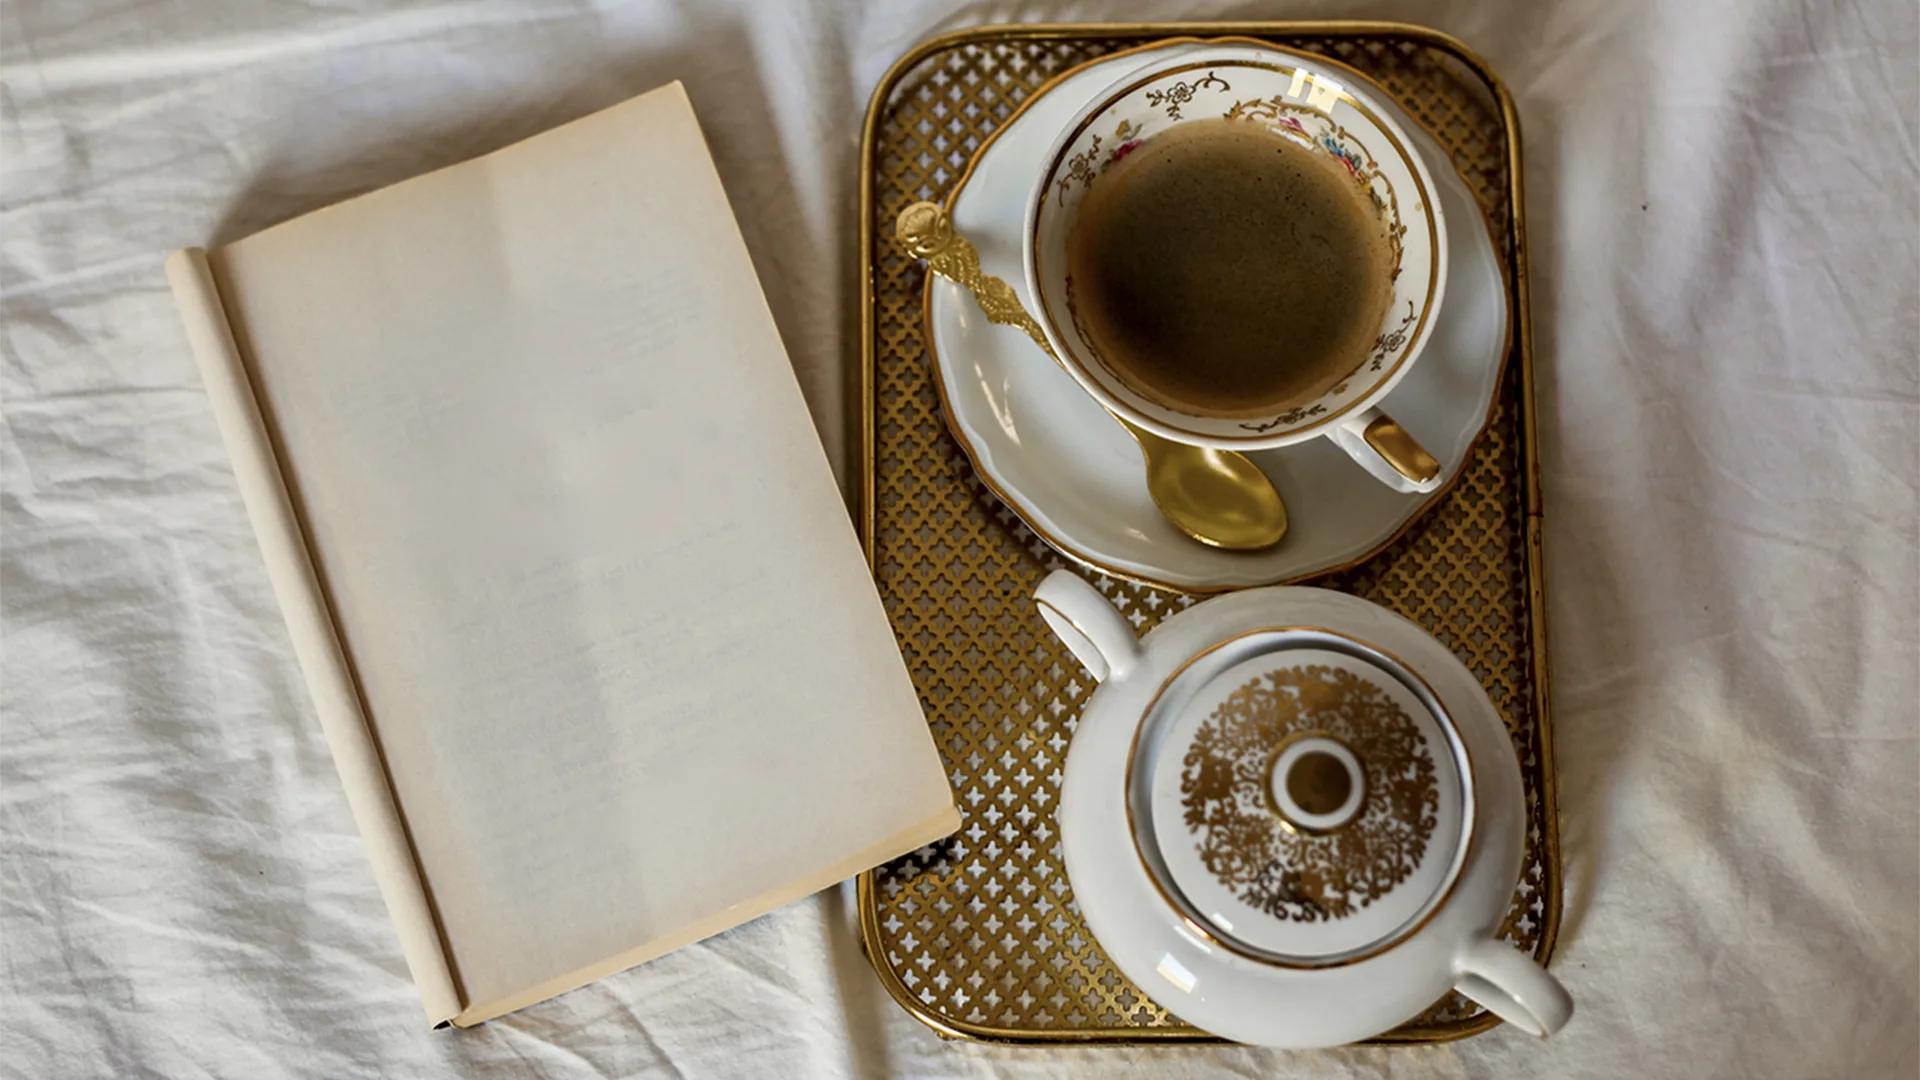 A empty book next to a tea cup and teapot